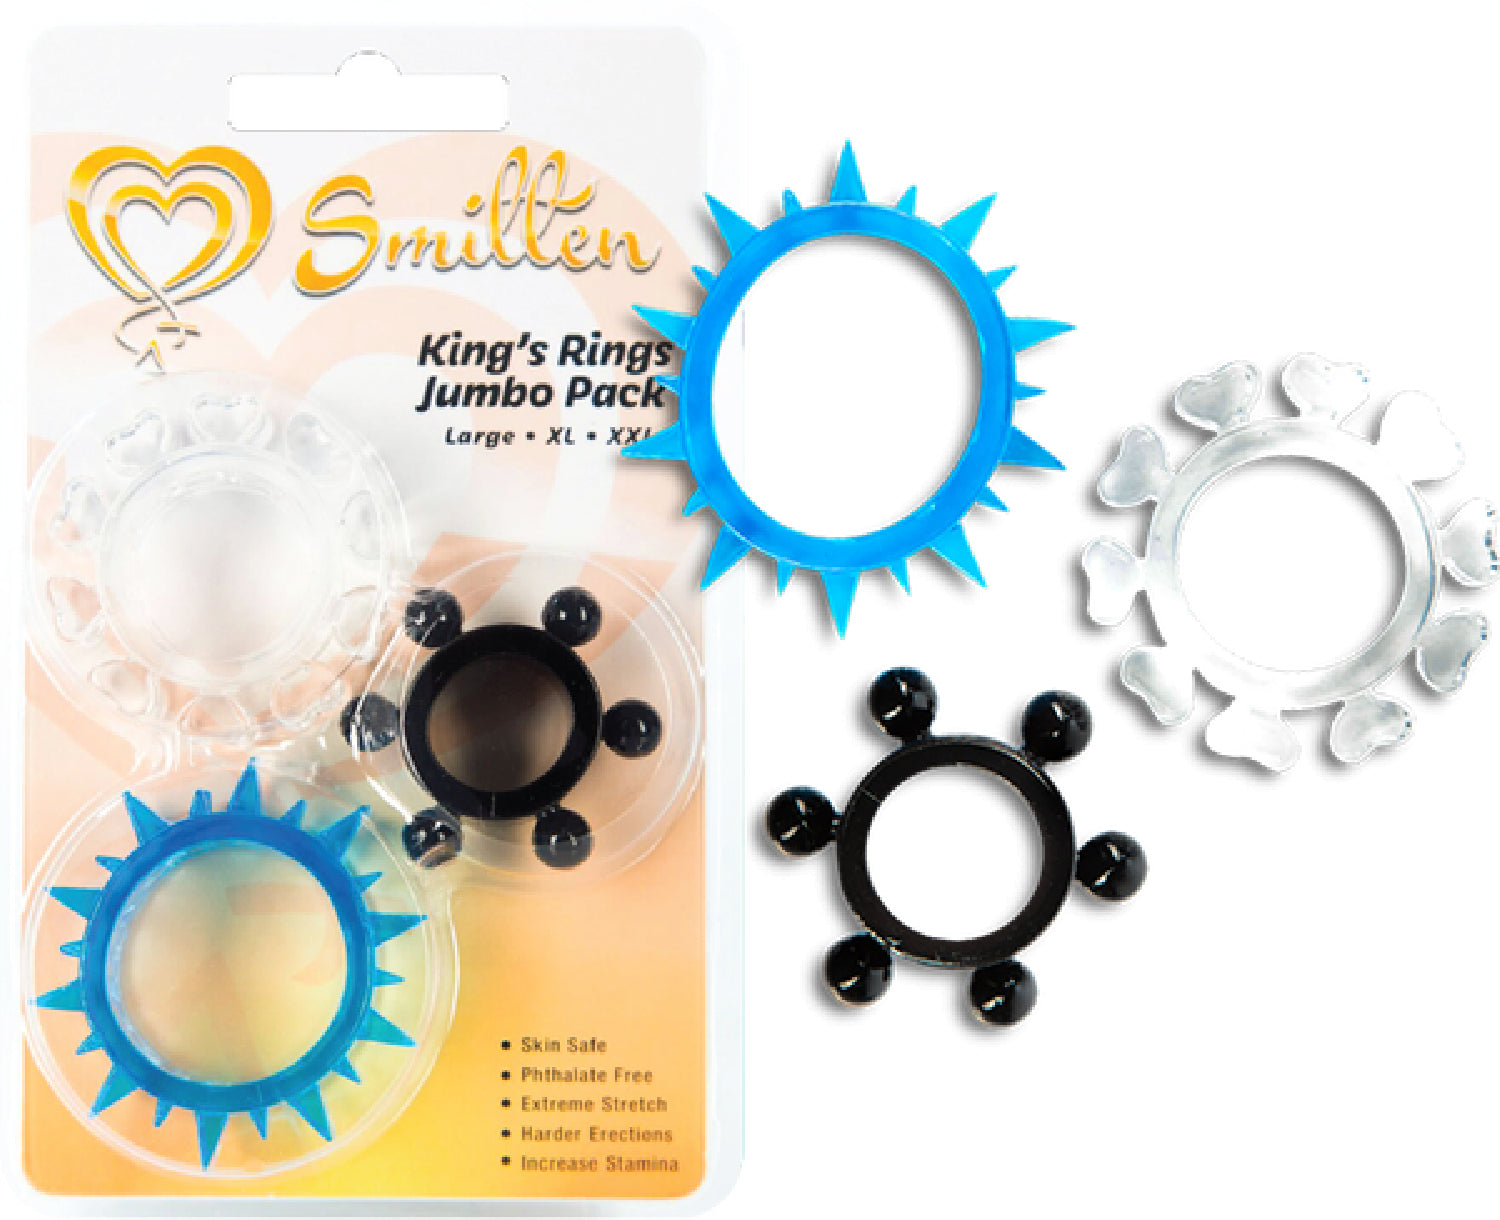 King's Rings Jumbo Pack 3-Pack - One Stop Adult Shop